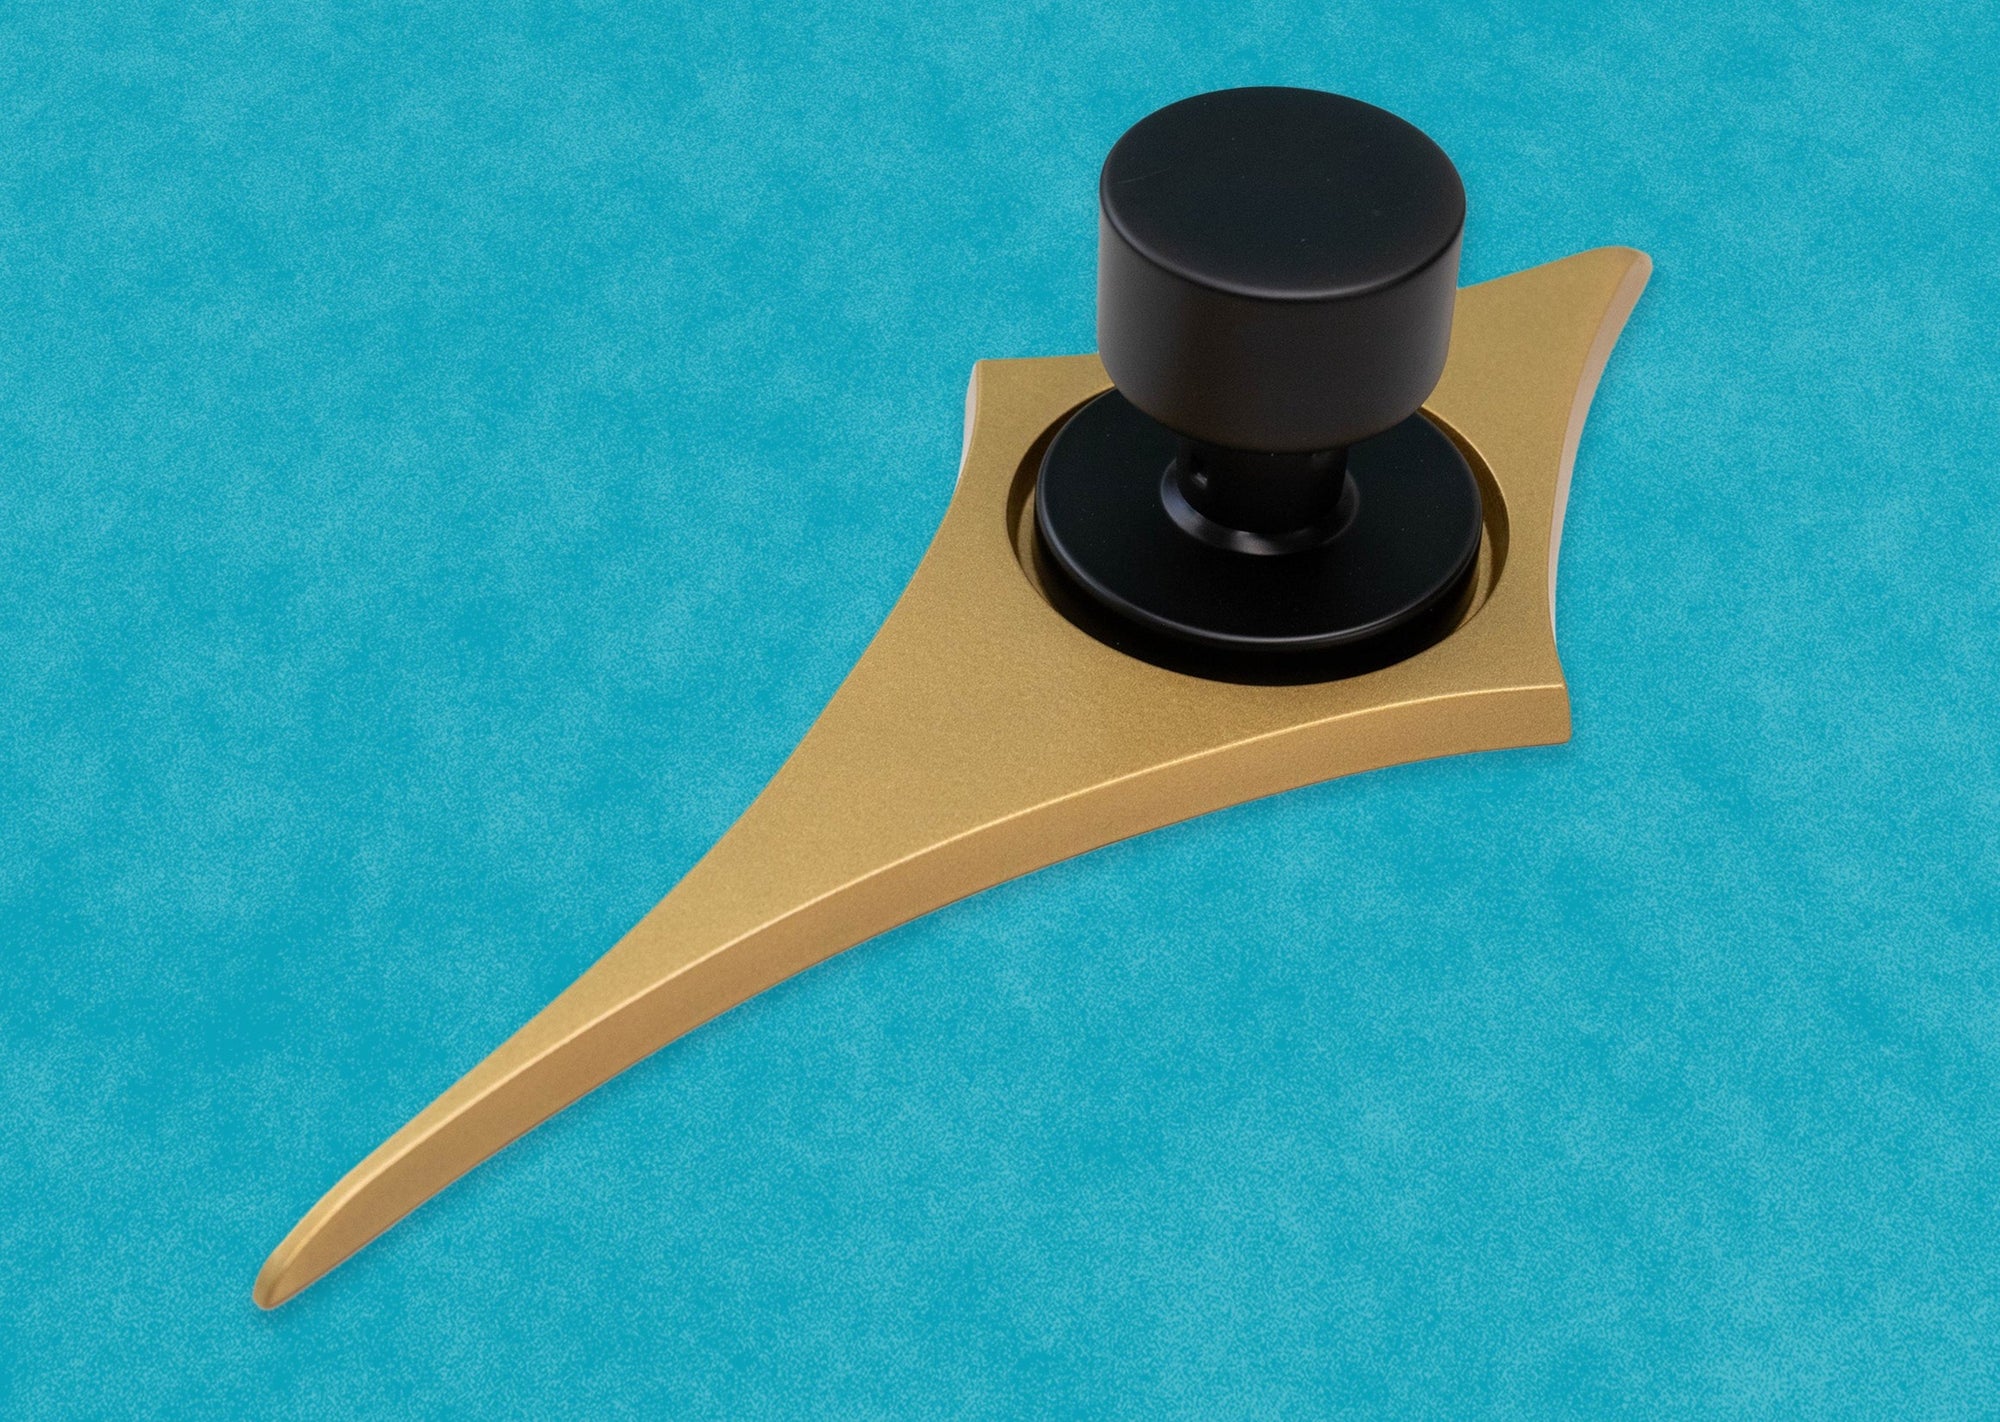 Angled view of the gold comet with a black doorknob. You can more easily see how smooth and flat the face of the escutcheon is, but the top and bottom points are rounded over the edge. The two shortest points horizontally remain flat.